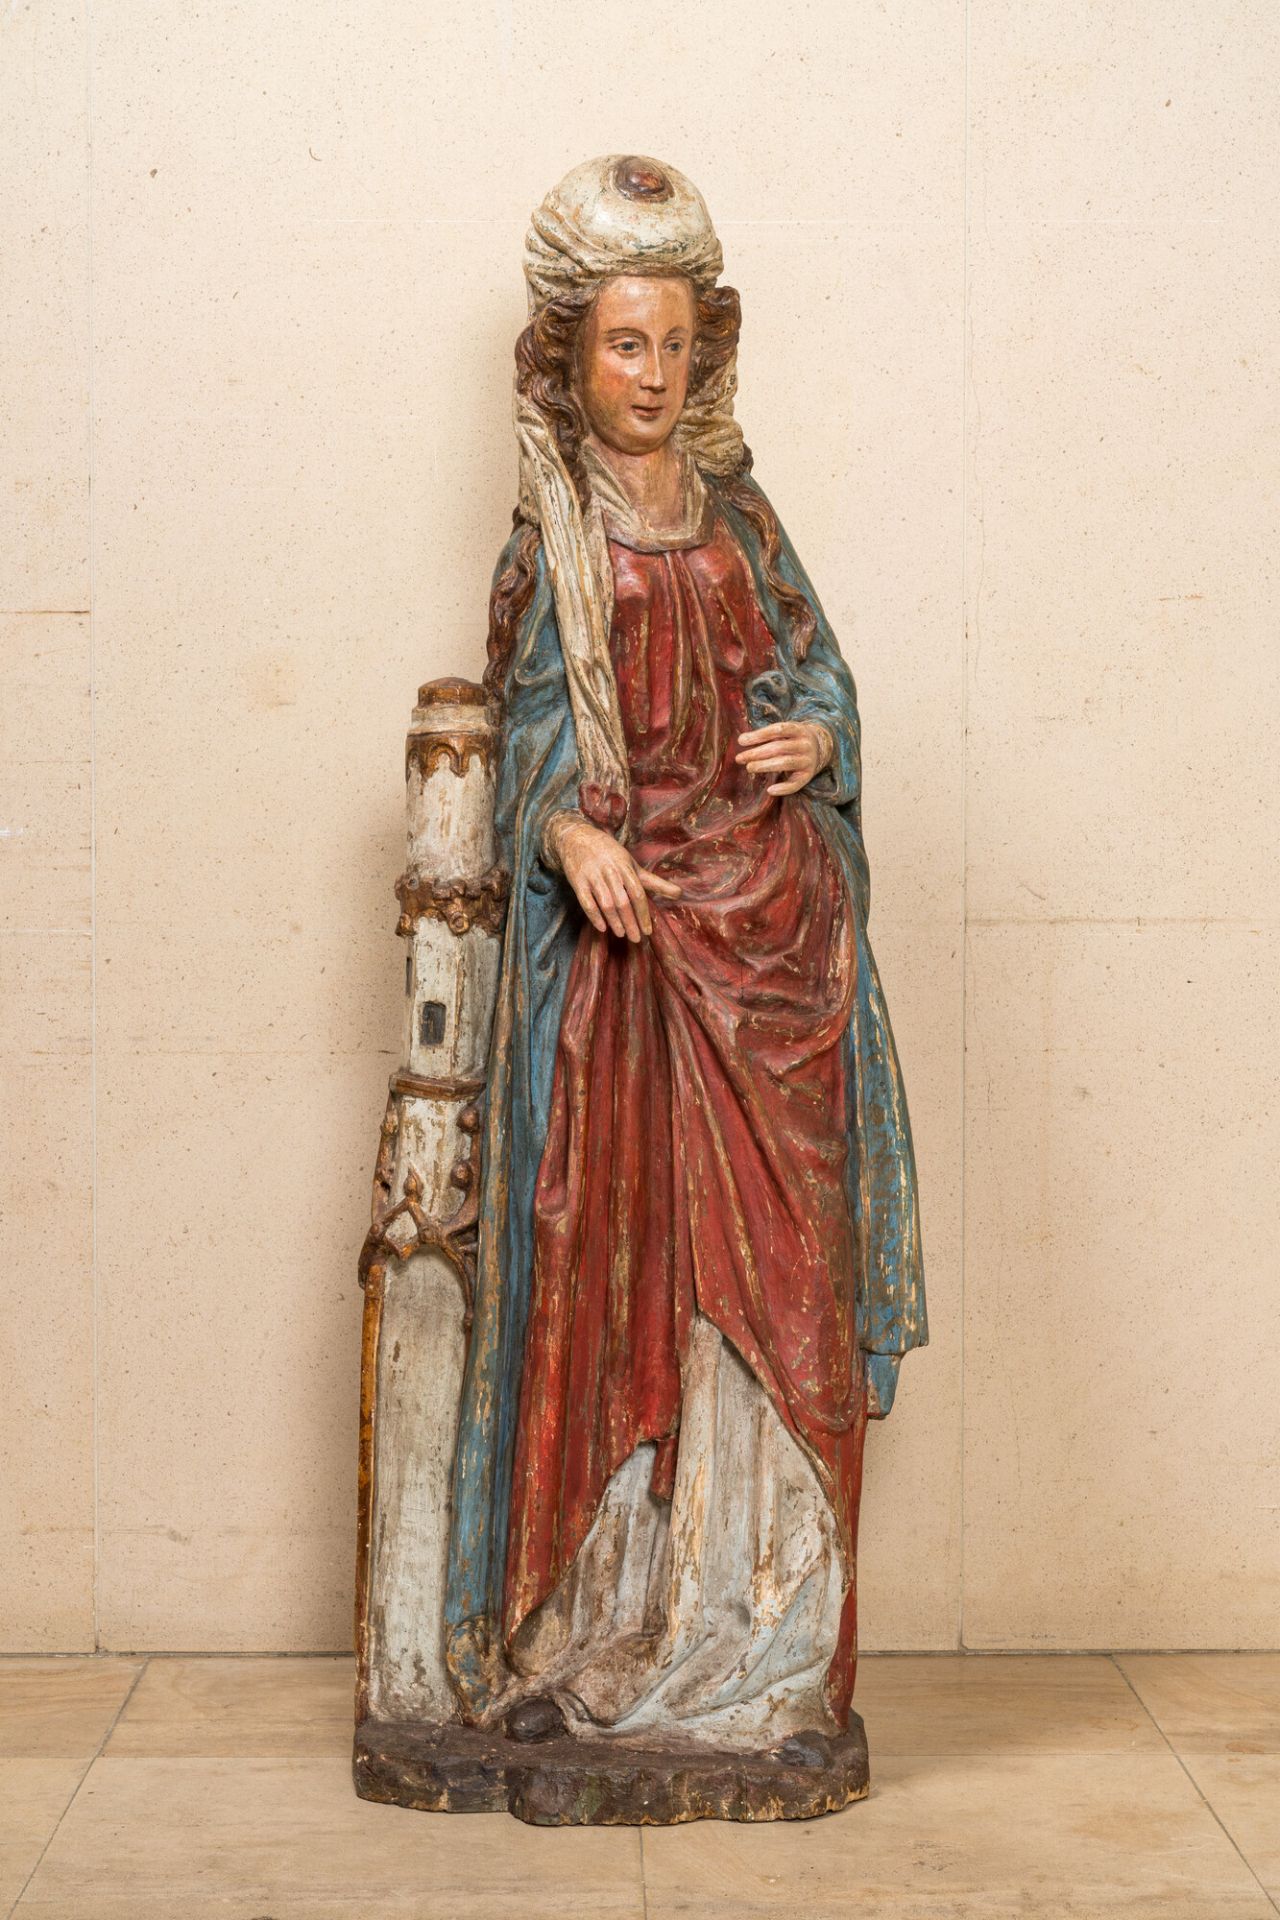 A large polychromed wooden figure of Saint Barbara, -Southern Netherlands, mid 16th C. - Image 2 of 6